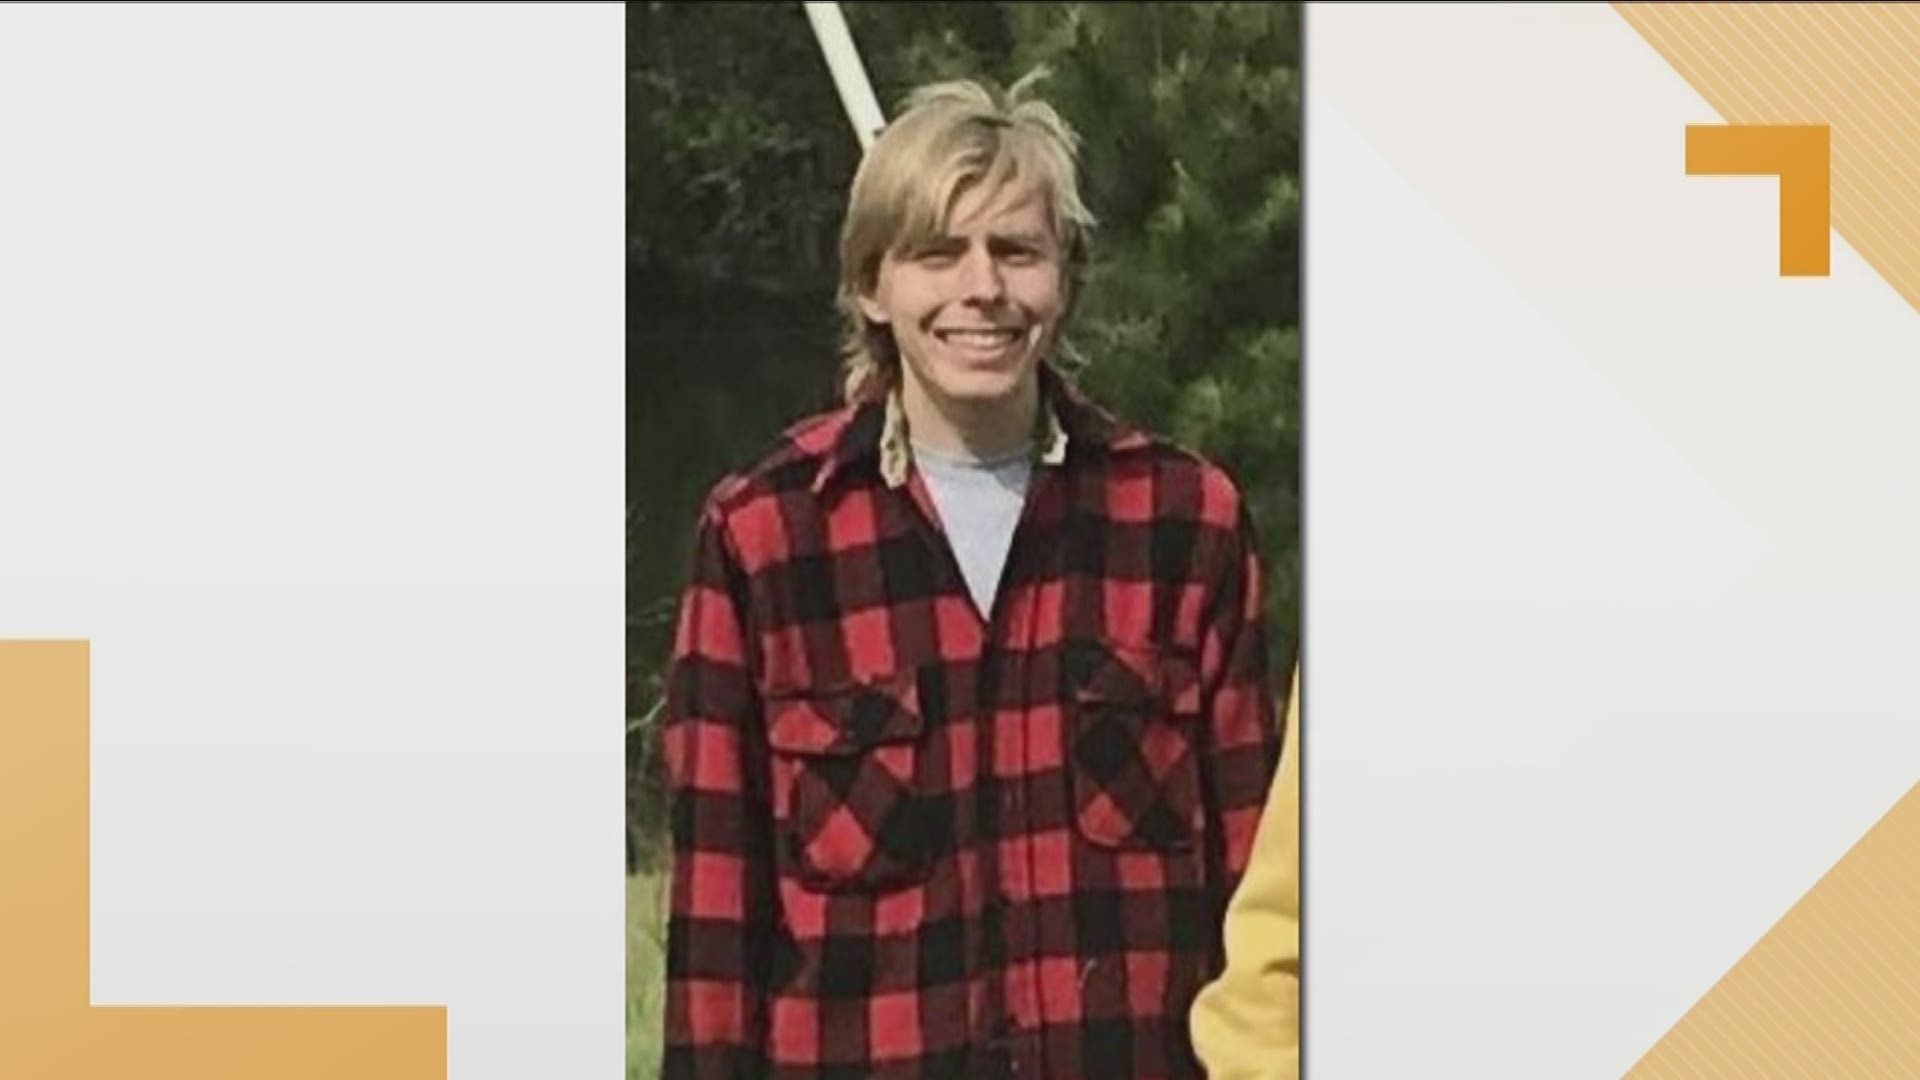 Turner Arnold was last seen on Hood Road in Stockbridge at about 5 p.m. Saturday, Henry County Police said. He was last seen wearing a gray shirt, blue and white jean shorts and Nike shoes.